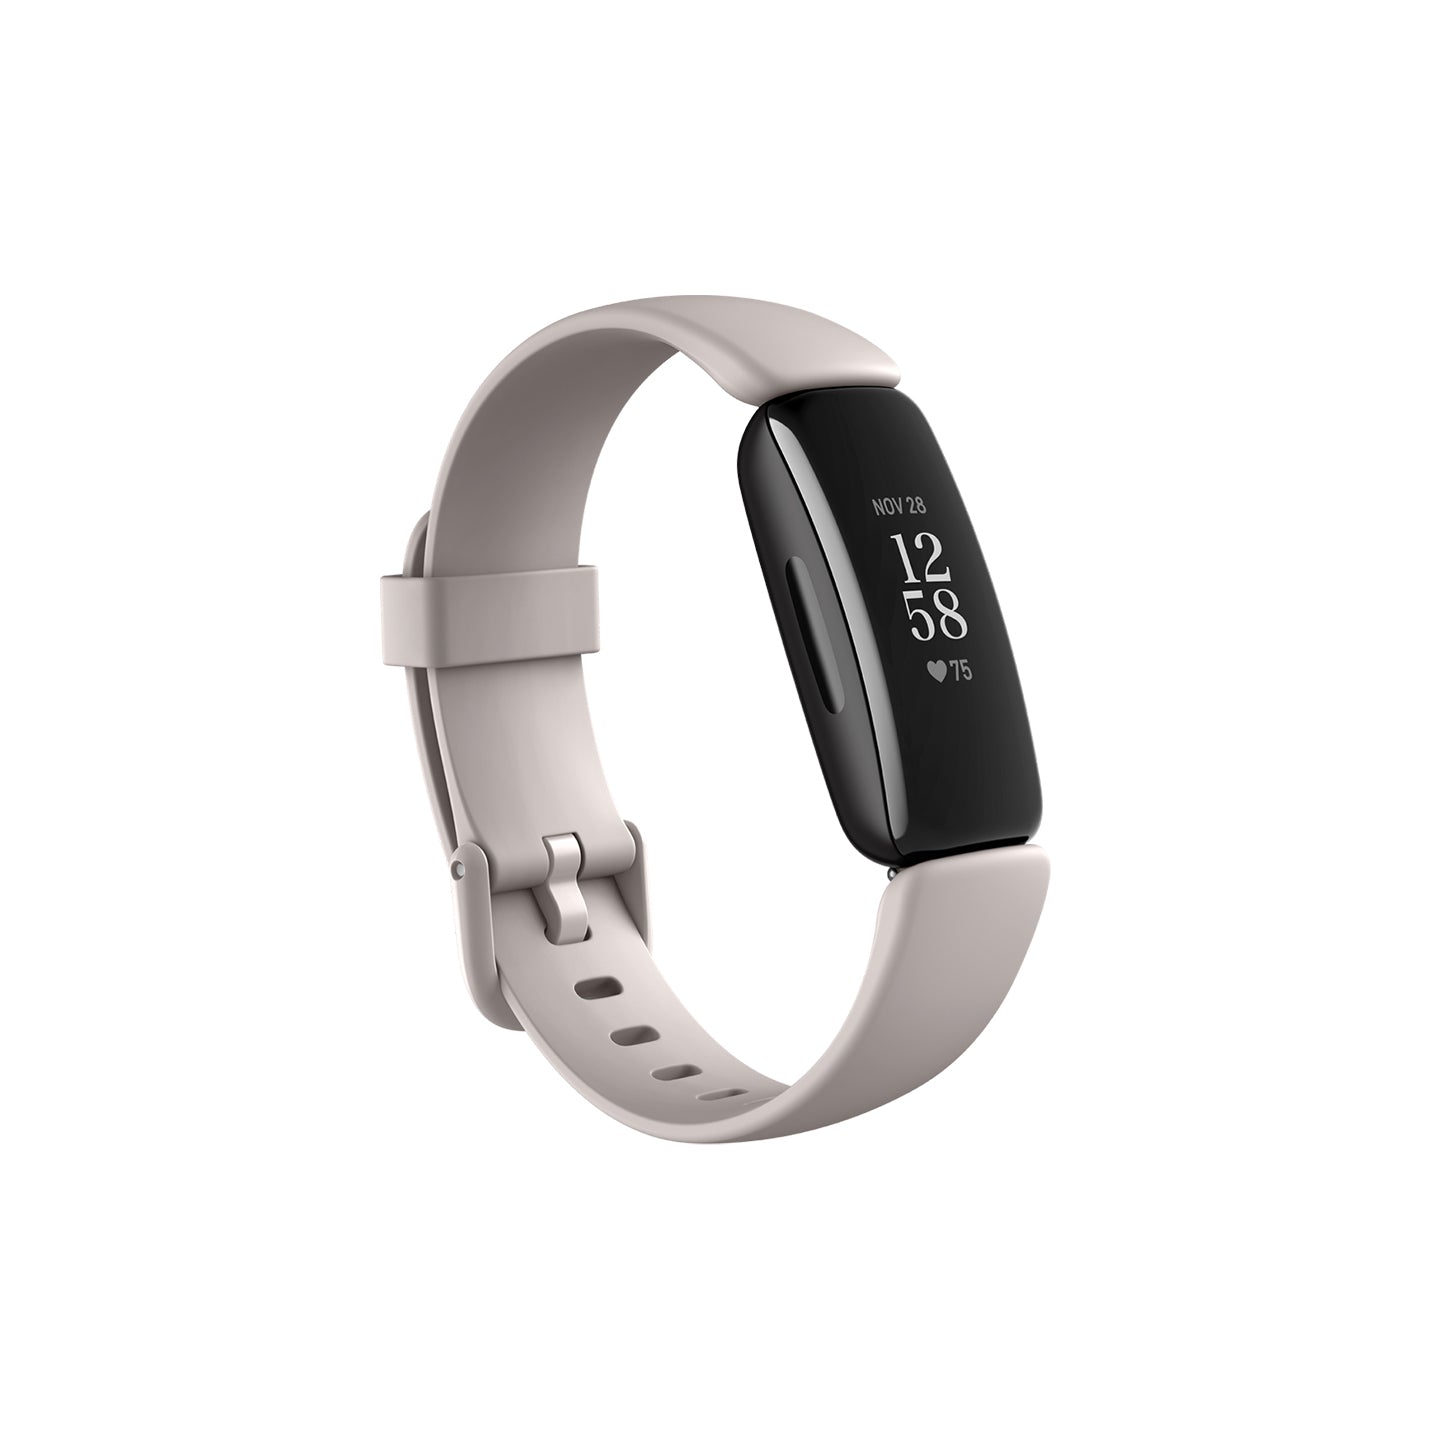 Fitbit Inspire 2 Health and Fitness Tracker Watch with Sleep